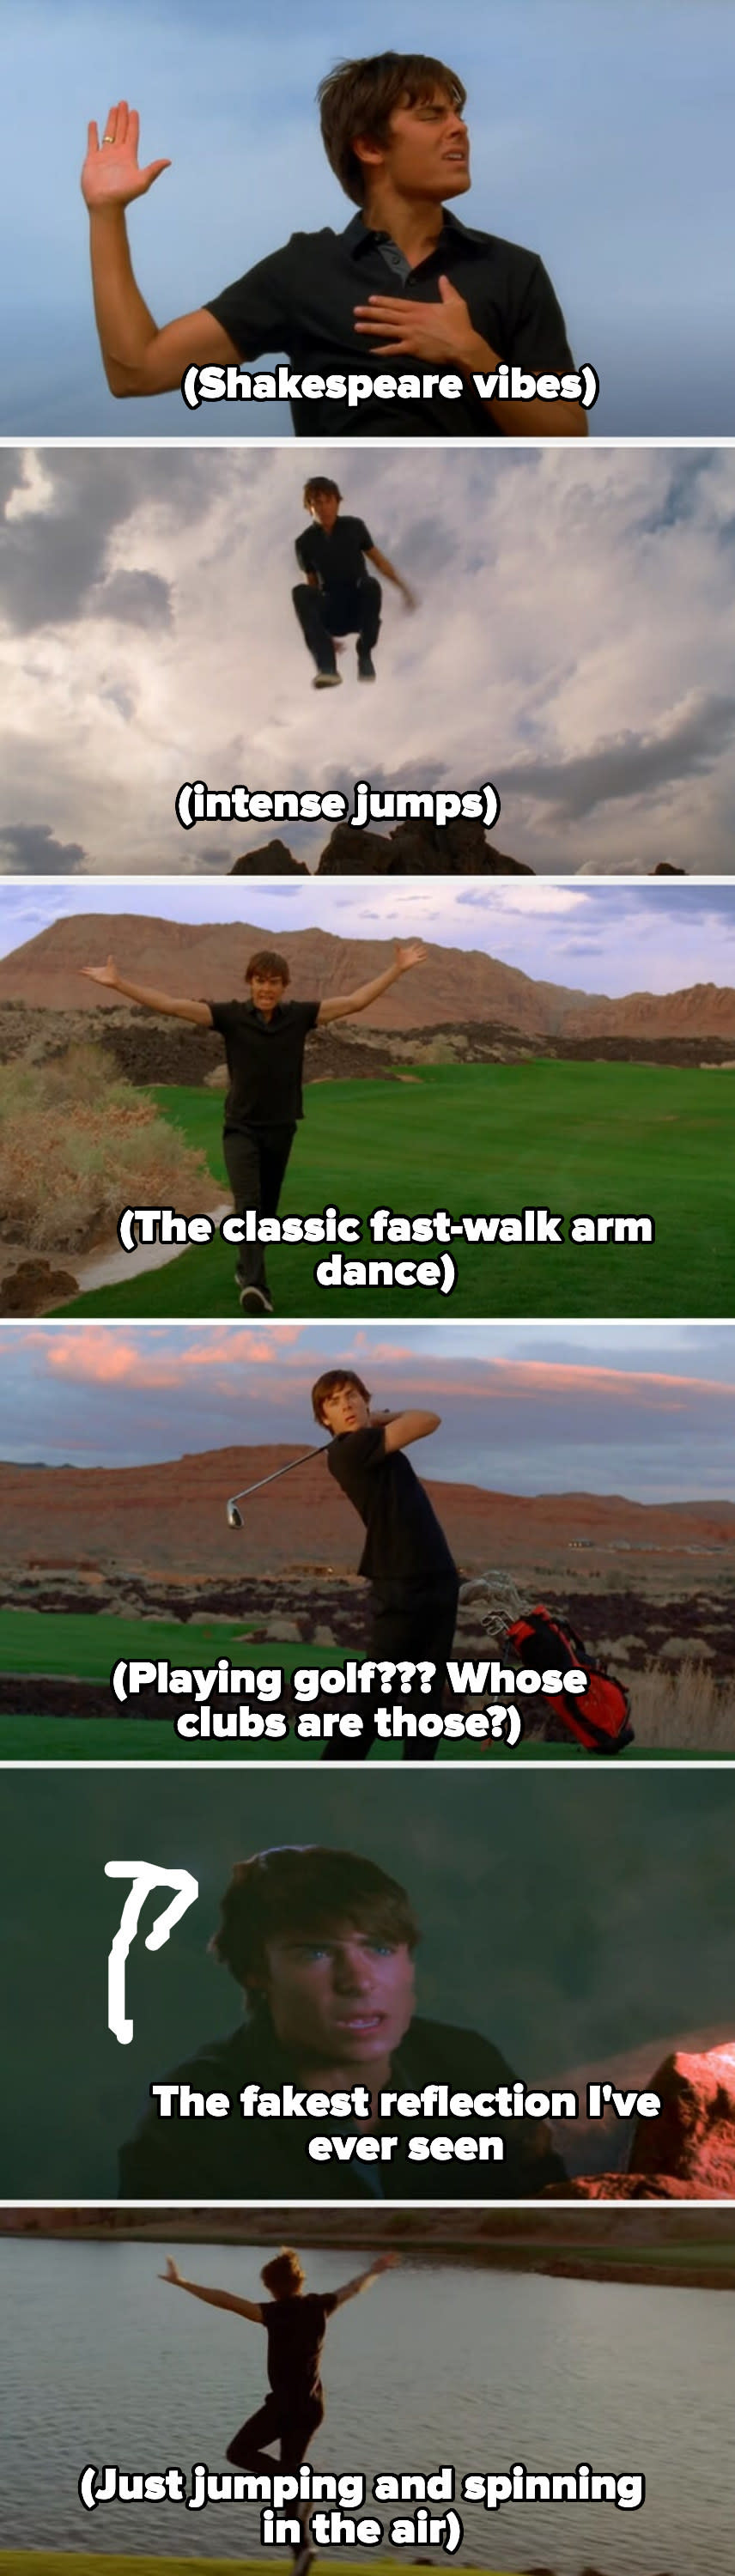 Troy dancing and singing along the golf course